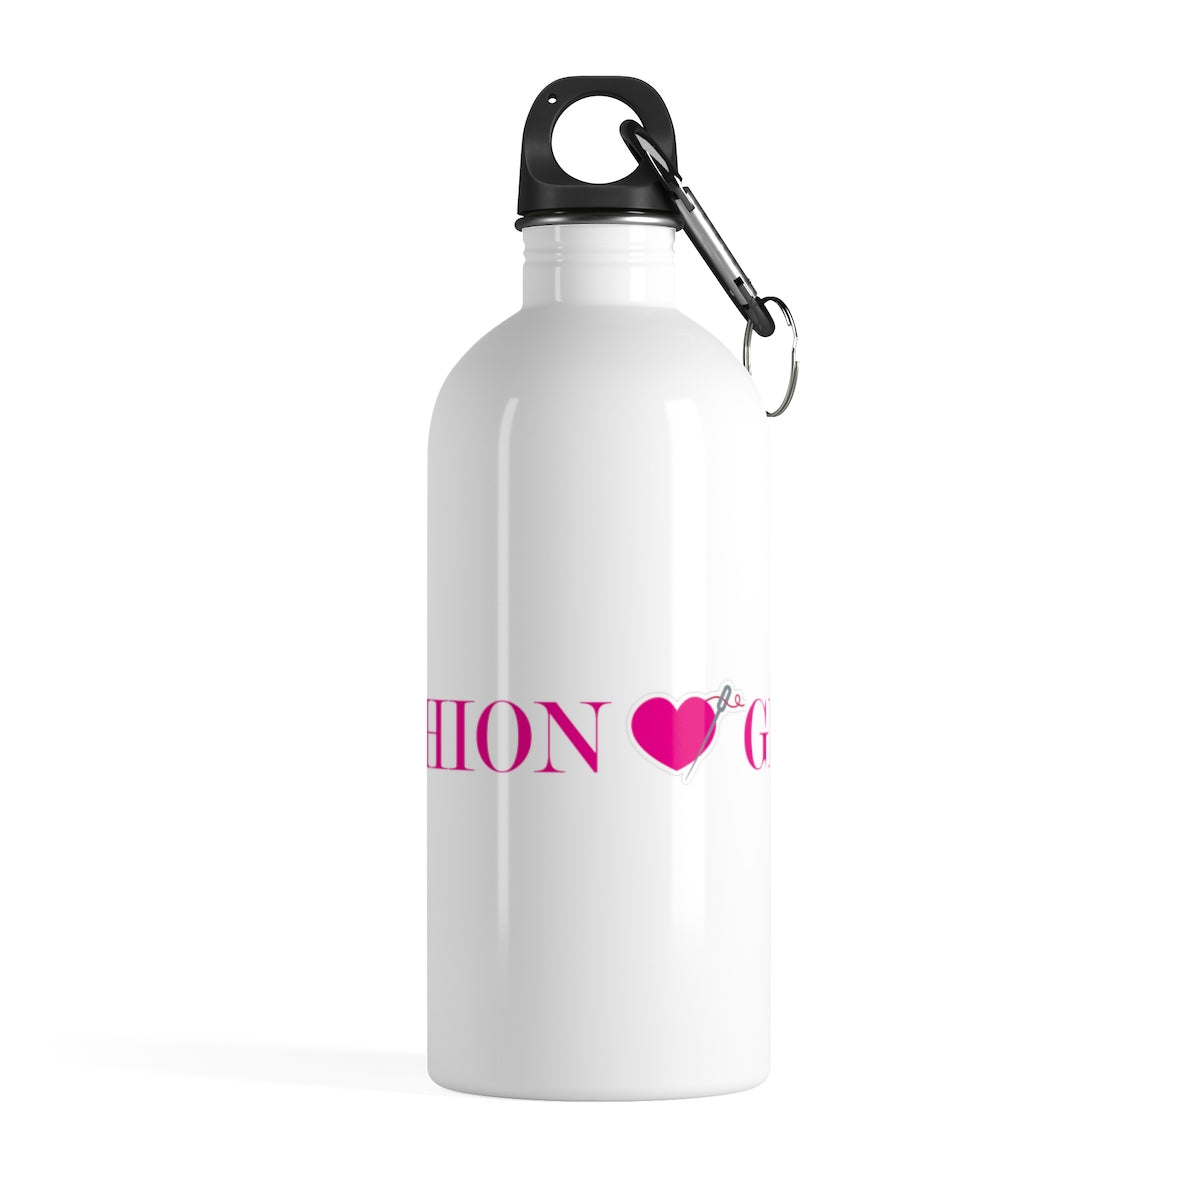 FASHION GIRL Stainless Steel Water Bottle